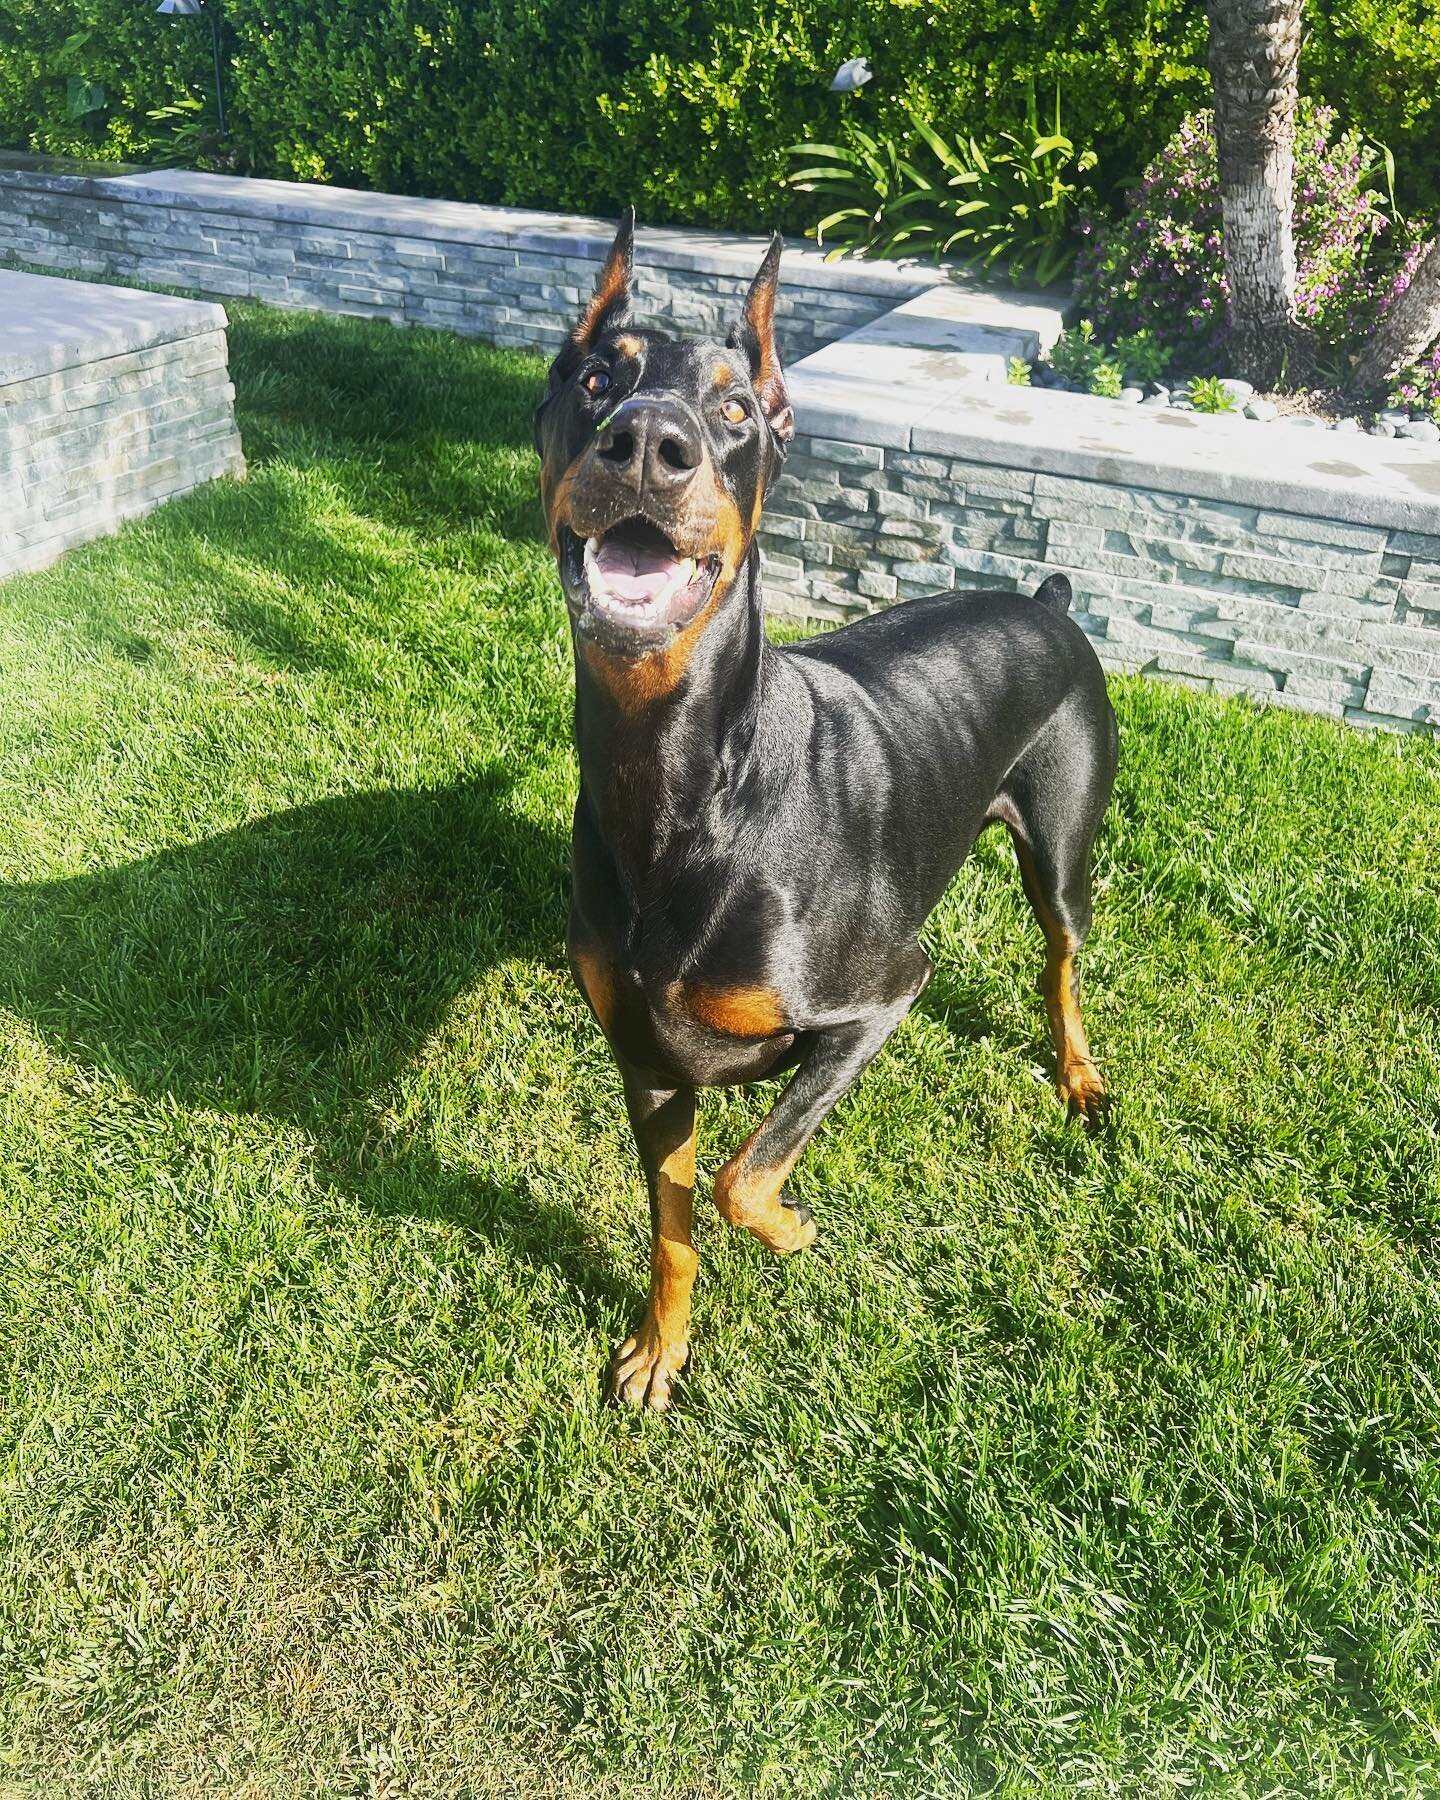 It&rsquo;s a #sundayfunday with Rexy boo!! Can you tell he&rsquo;s having fun while his parents are away?! #dobermanlove #happypuppy #petsitterlife #barksandrecla 
.
.
.
#happydogs #happydoghappylife #happydogsclub #happydogshappylife #dogoftheday #d